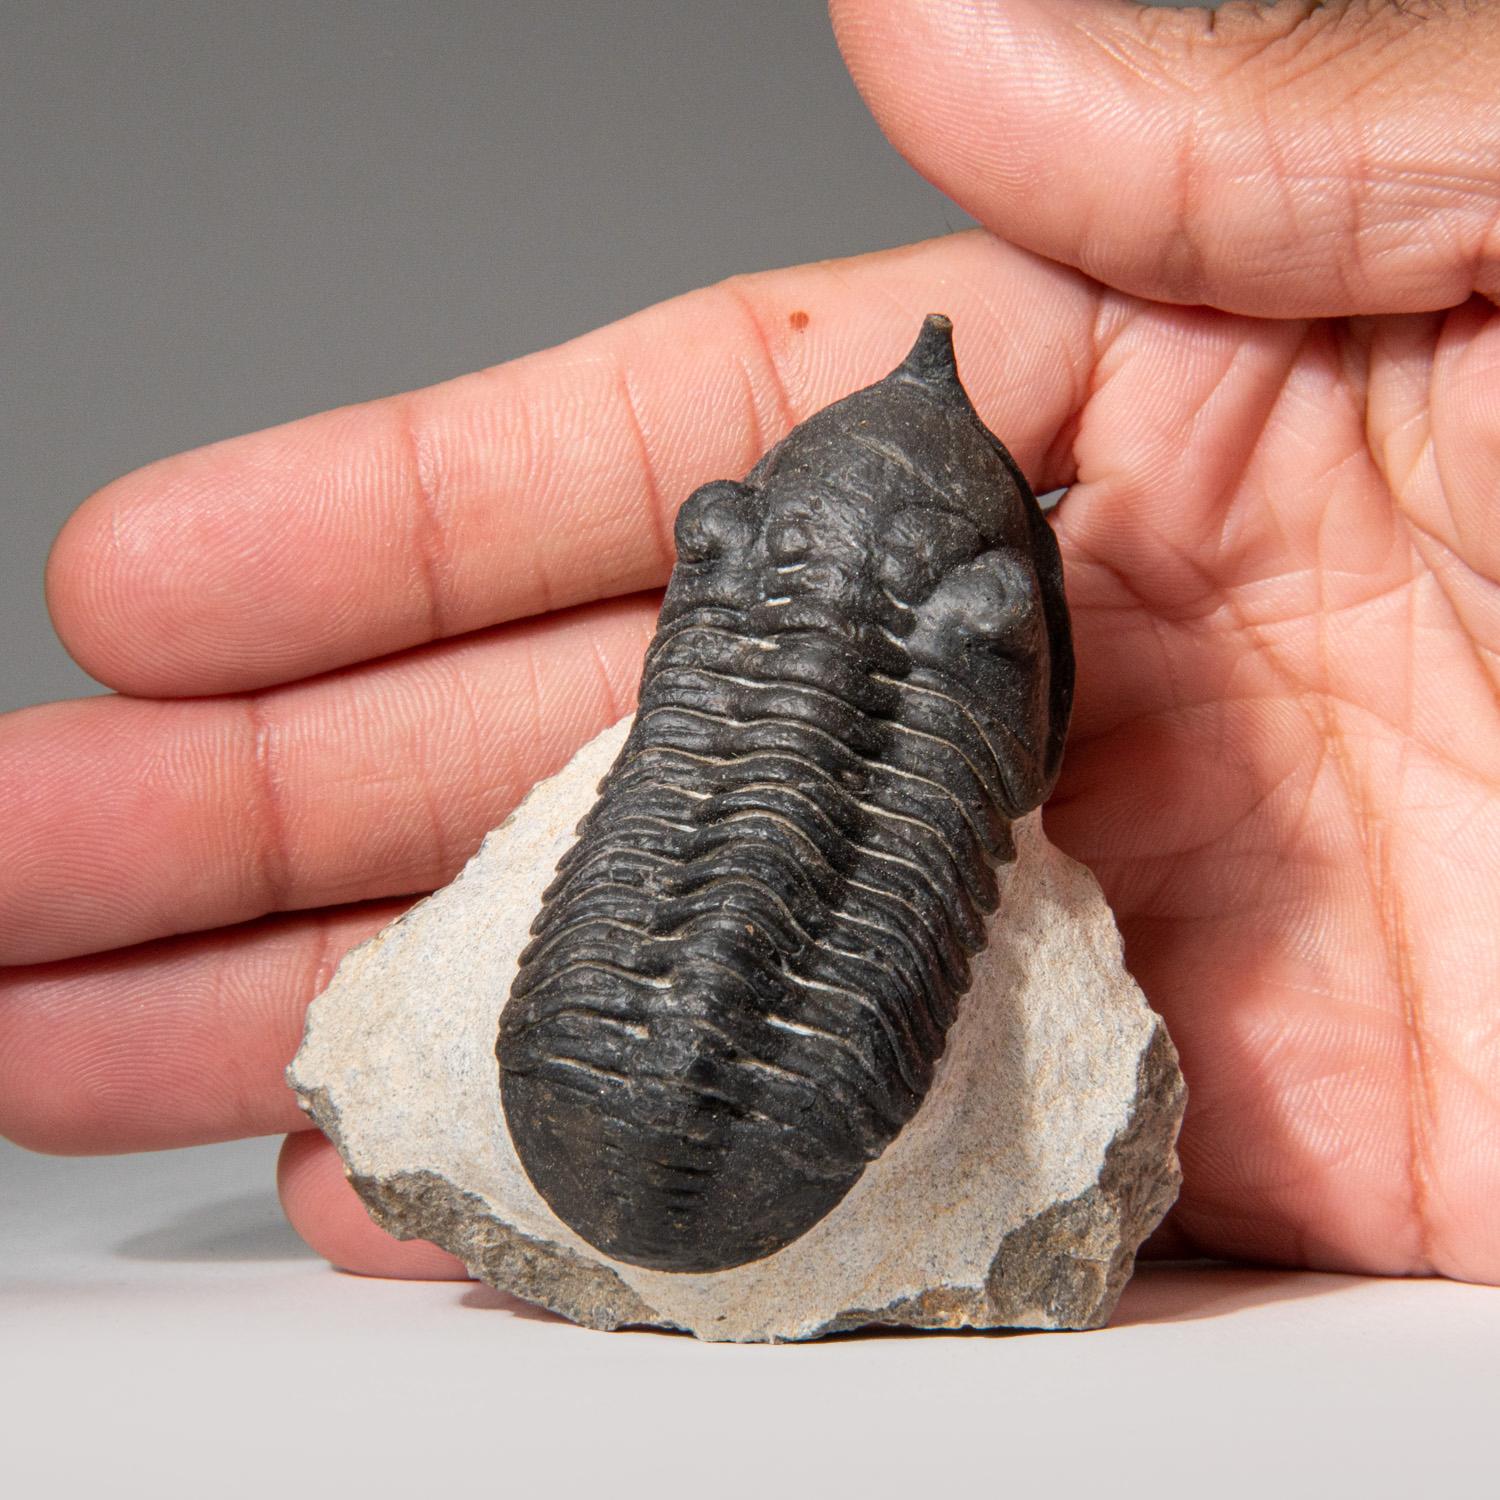 Ptychopariida is a large, heterogeneous order of trilobite containing some of the most primitive species known. The earliest species occurred in the second half of the Lower Cambrian period. Trilobites have facial sutures that run along the margin